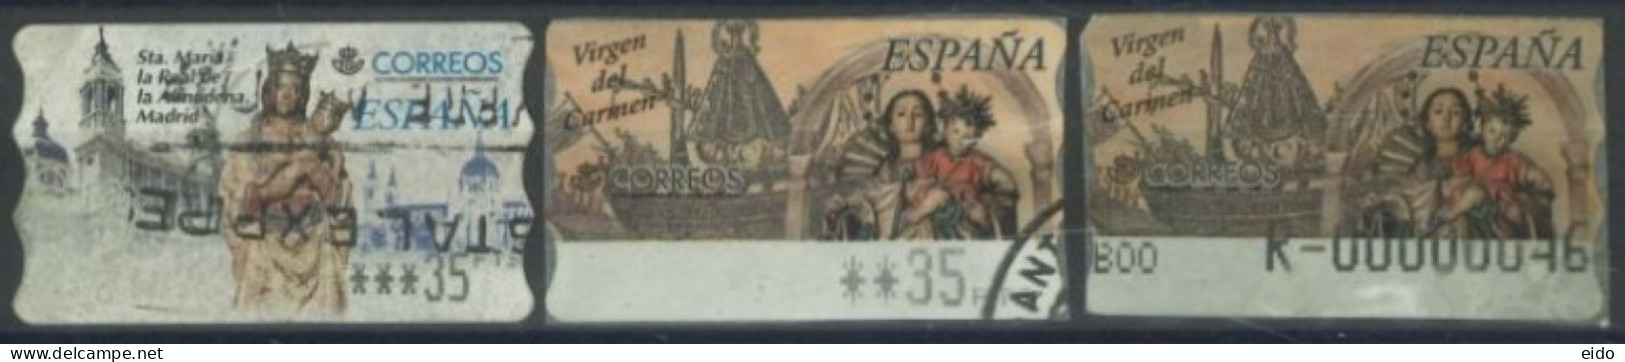 SPAIN - 2000 - ST. MARIA  AND VIRGIN OF CARMEN . STAMPS LABELS SET OF 3 OF DIFFERENT VALUES, USED . - Used Stamps